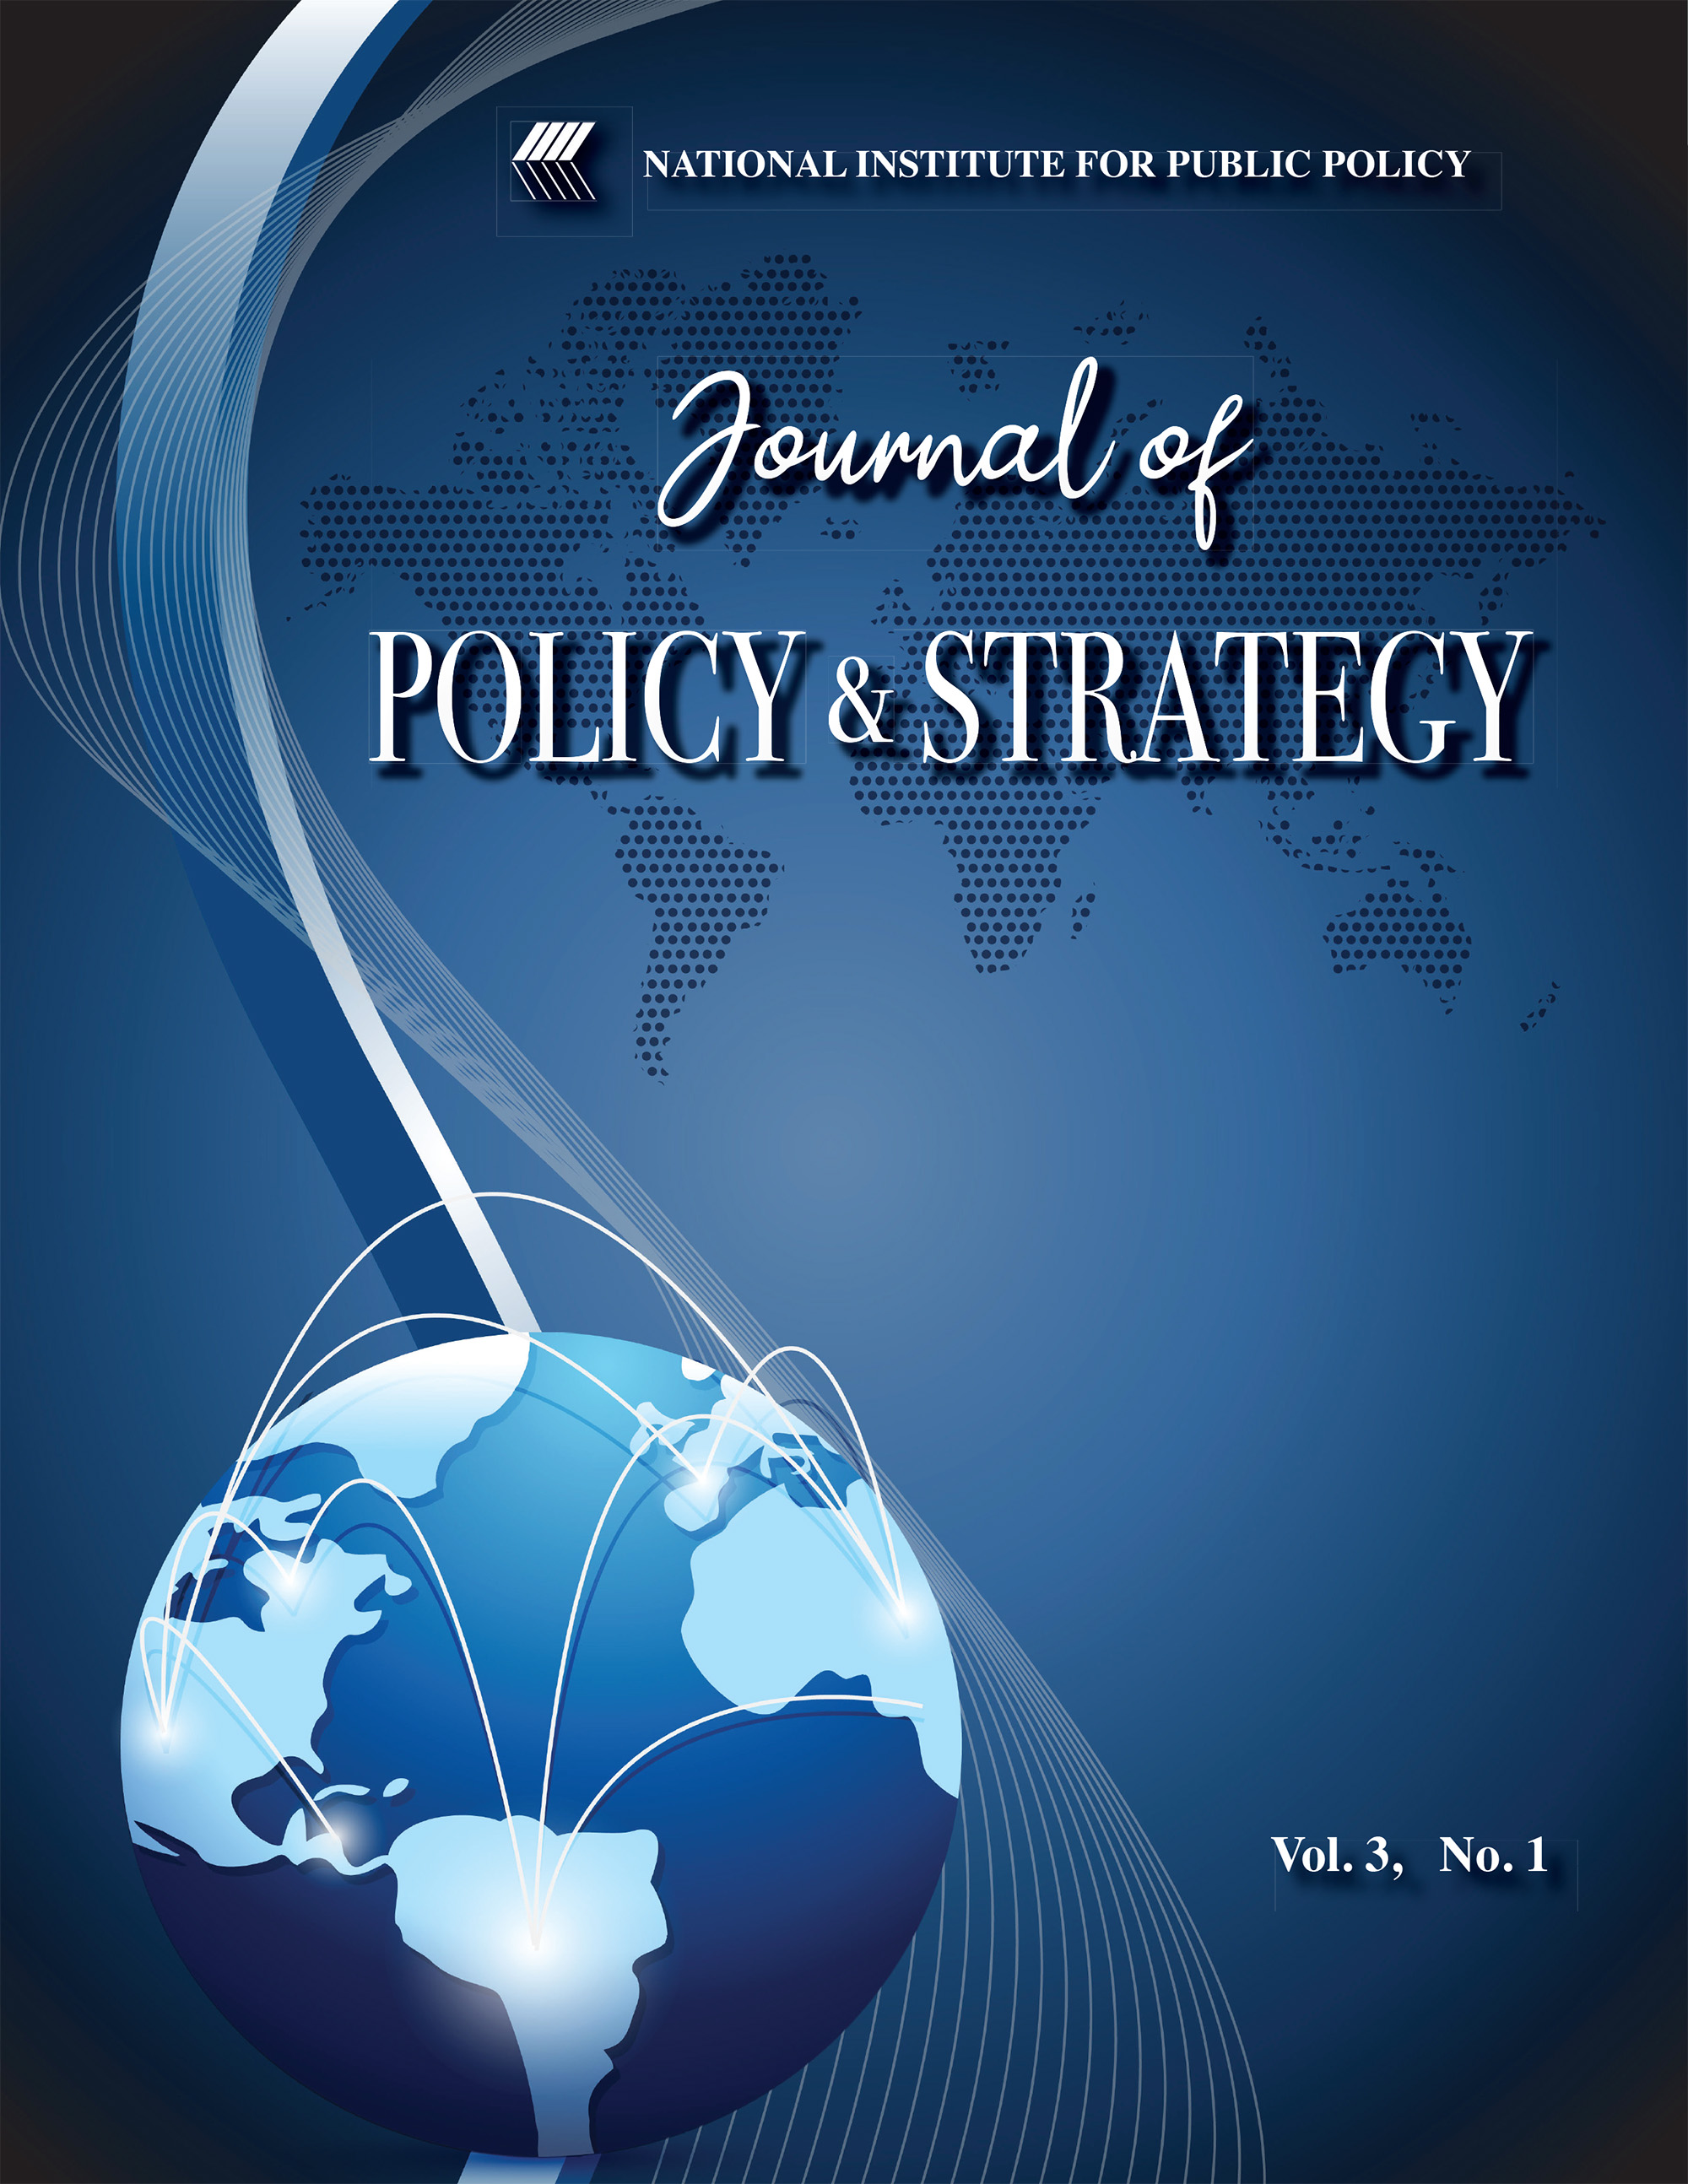 Journal of Policy & Strategy - Vol. 3, No. 1